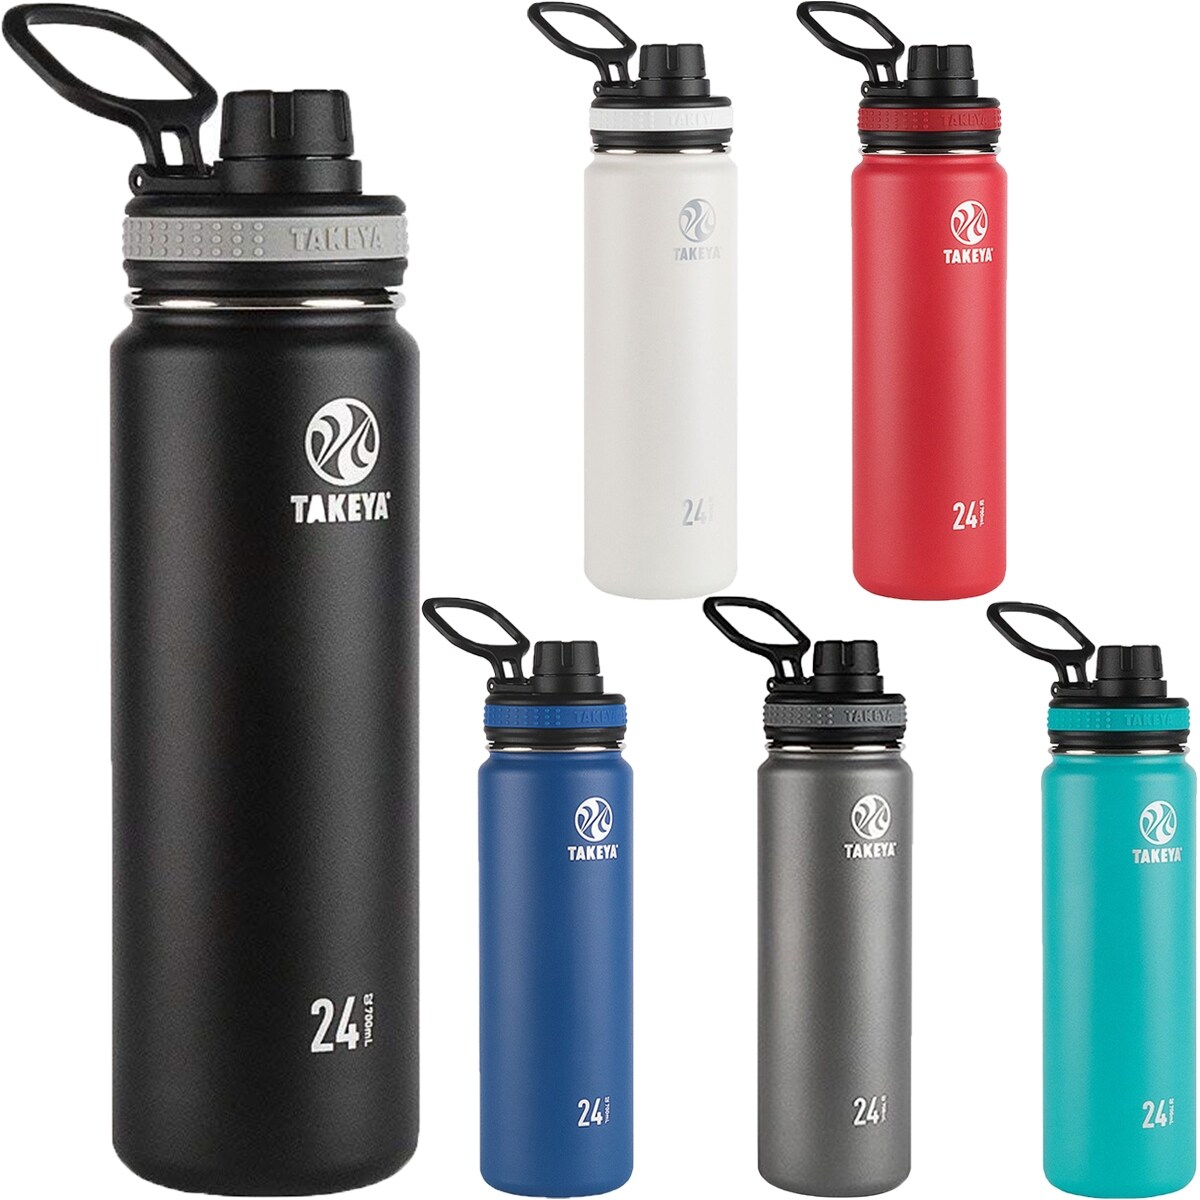 thermo flask 24 oz